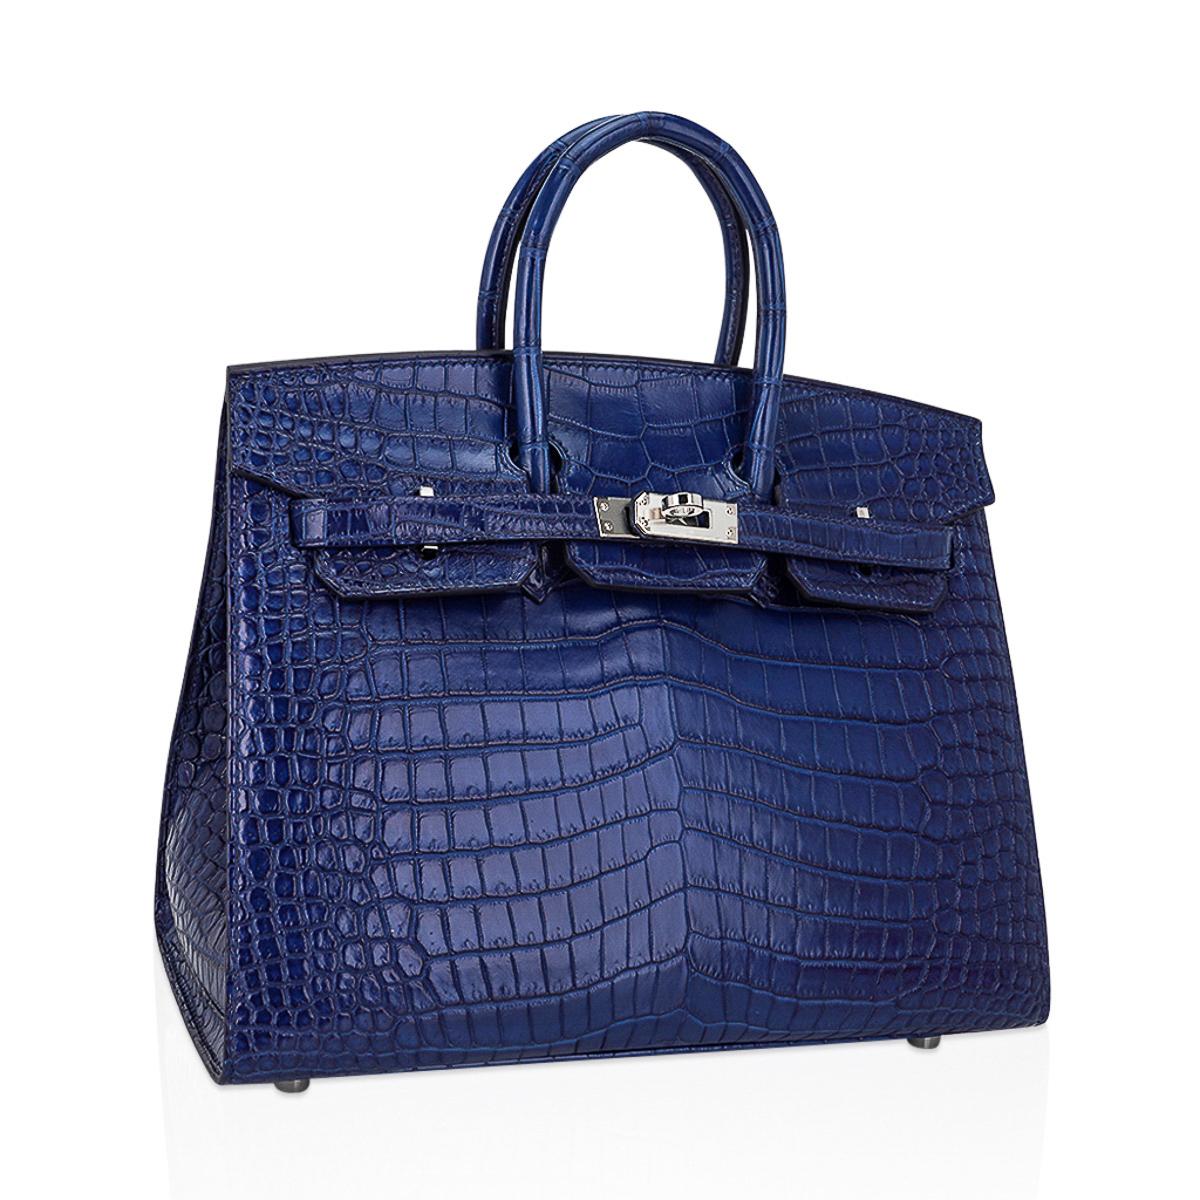 Mightychic offers an  Hermes Birkin Sellier 25 bag featured in Indigo Aizome matte Porosus crocodile.
For the first time this ancient Japanese method of Indigo dyeing is offered in a limited edition by Hermes on their most precious skin.
The unique